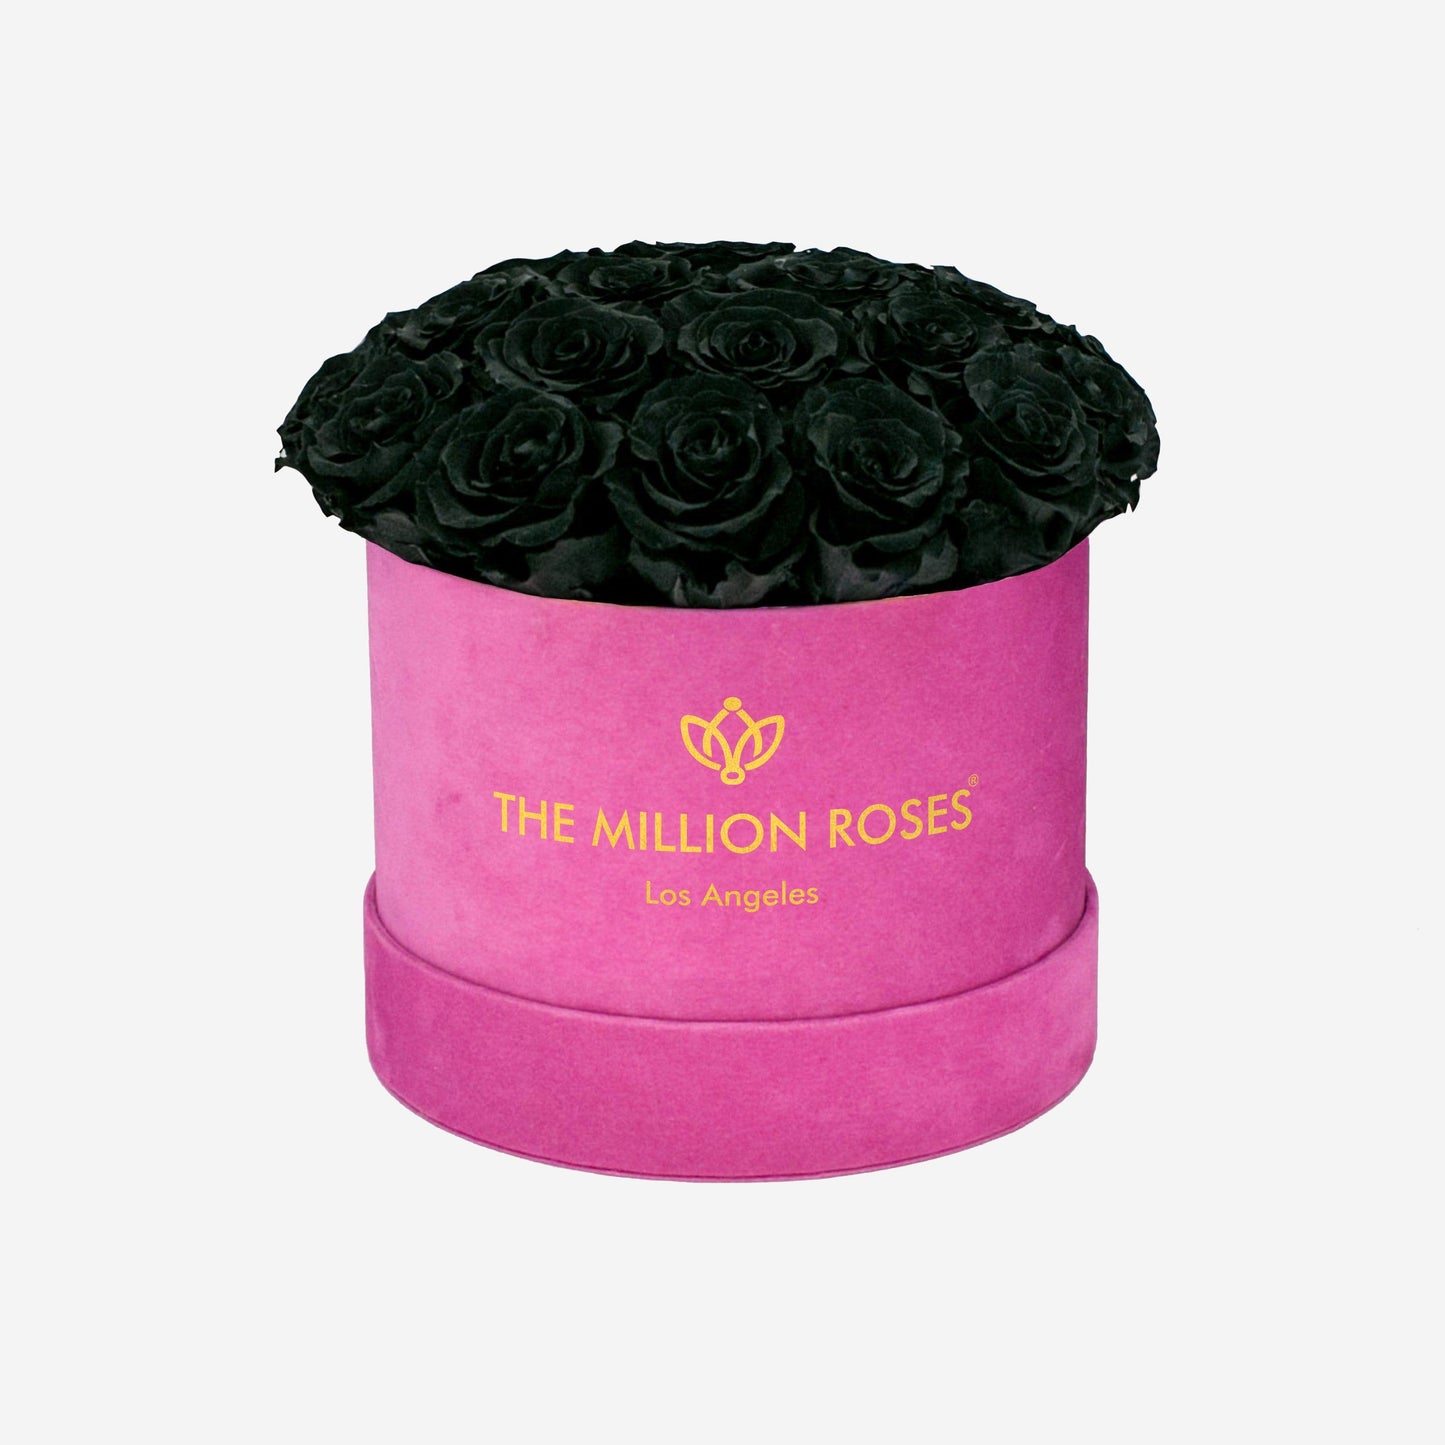 Classic Hot Pink Suede Dome Box | Black Roses - The Million Roses